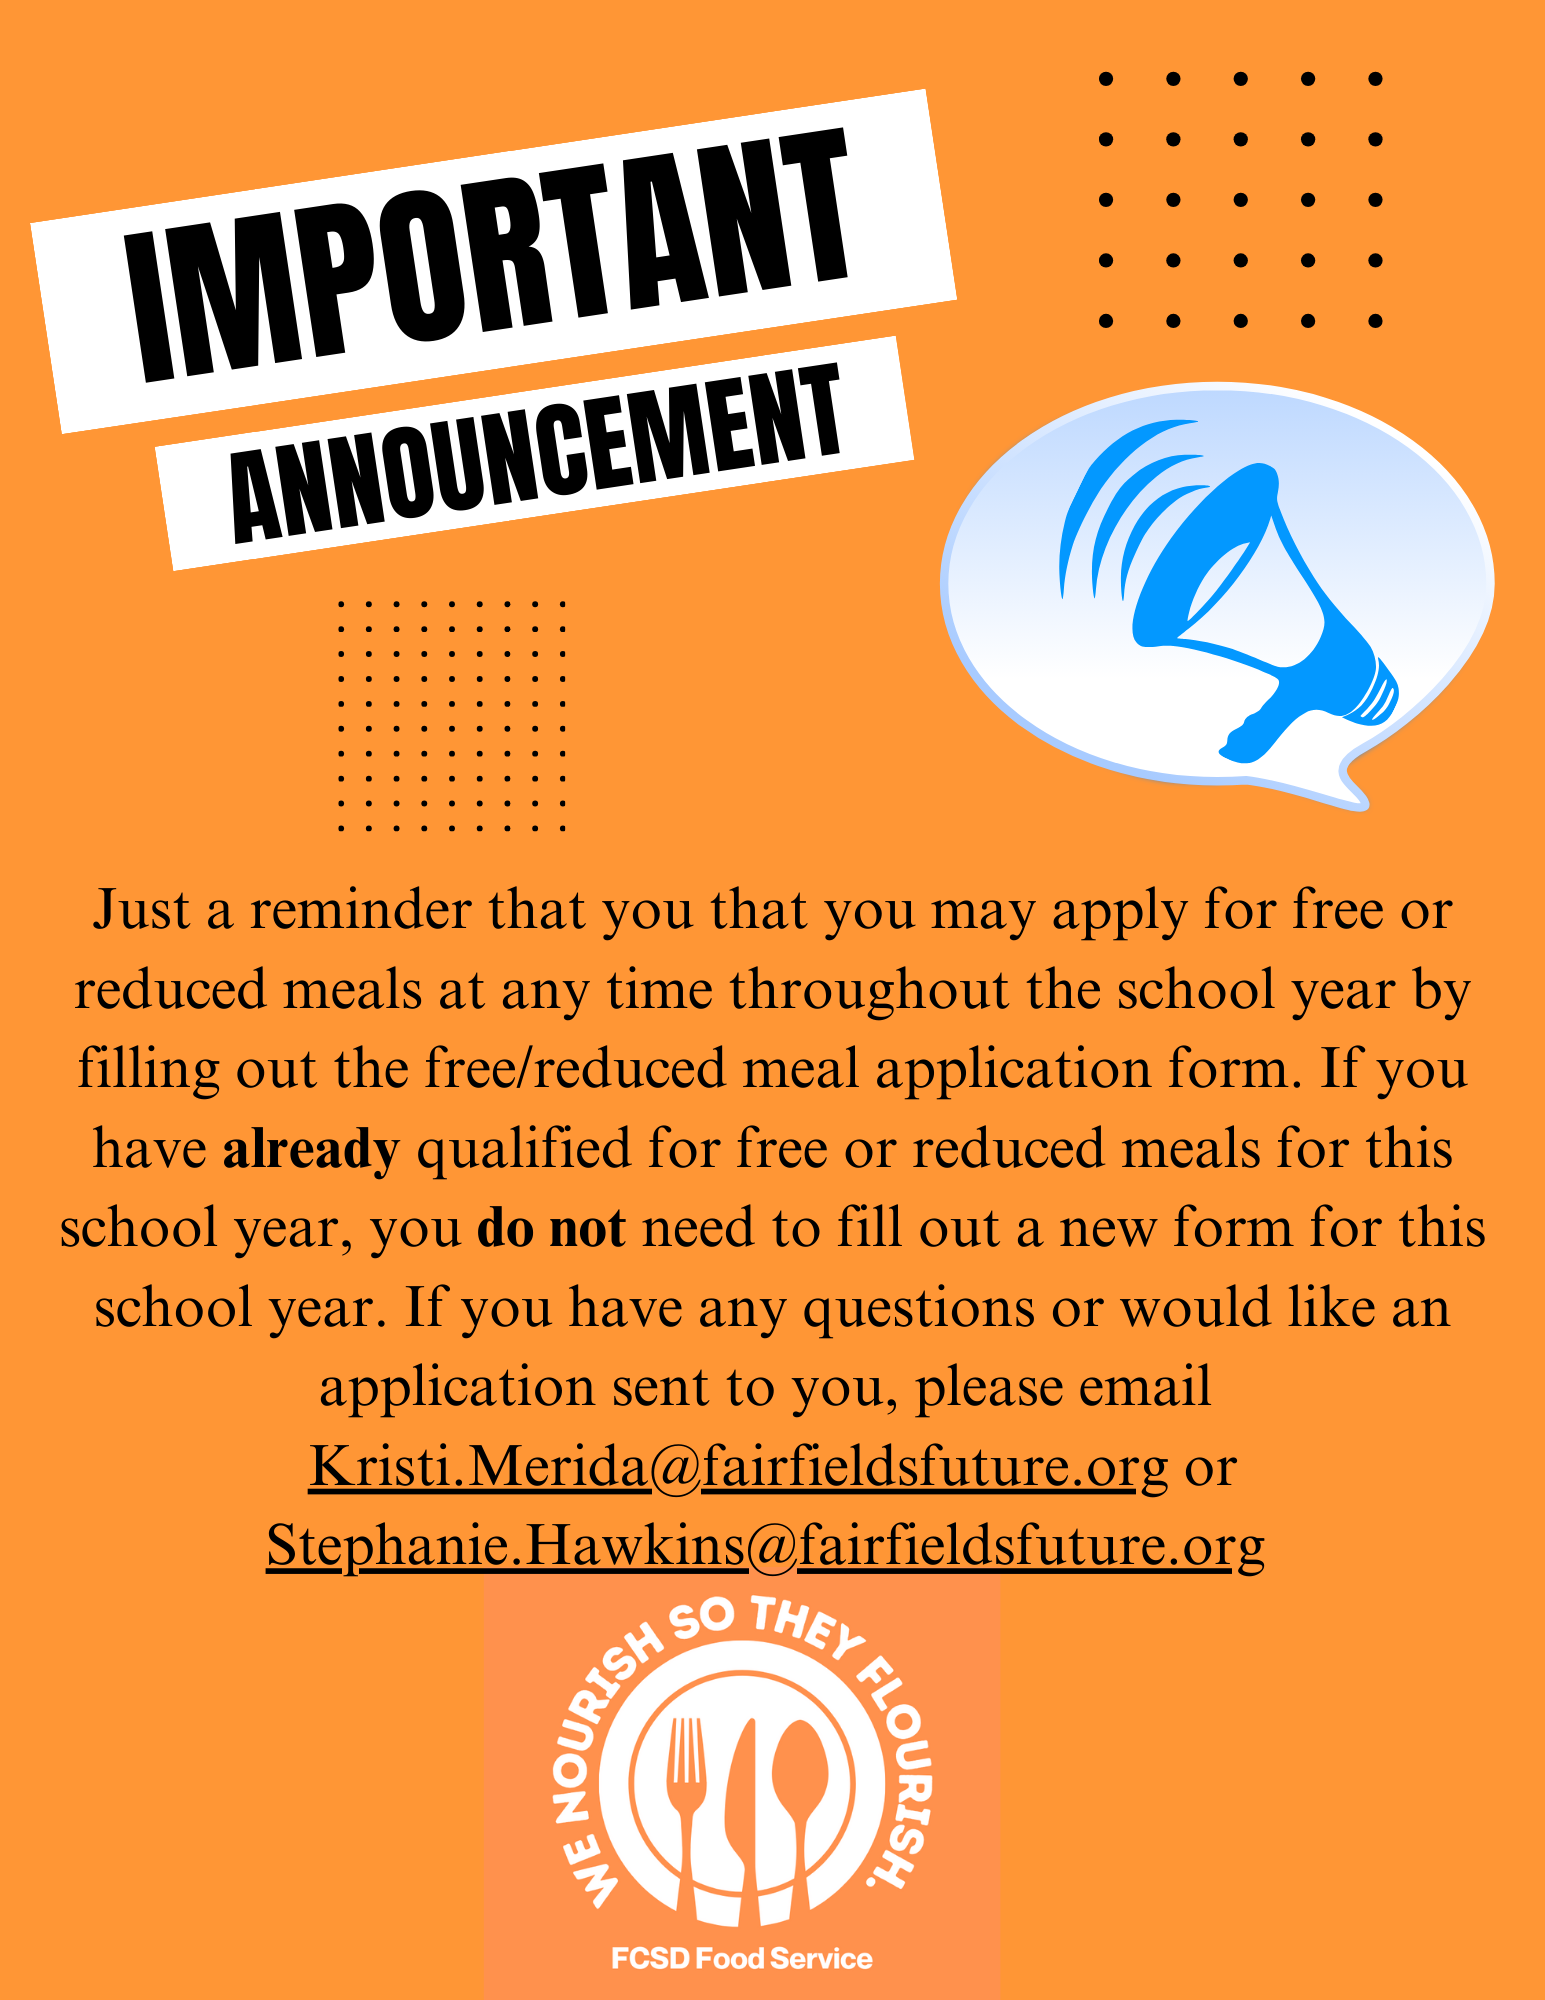 Free or Reduced Meal announcement